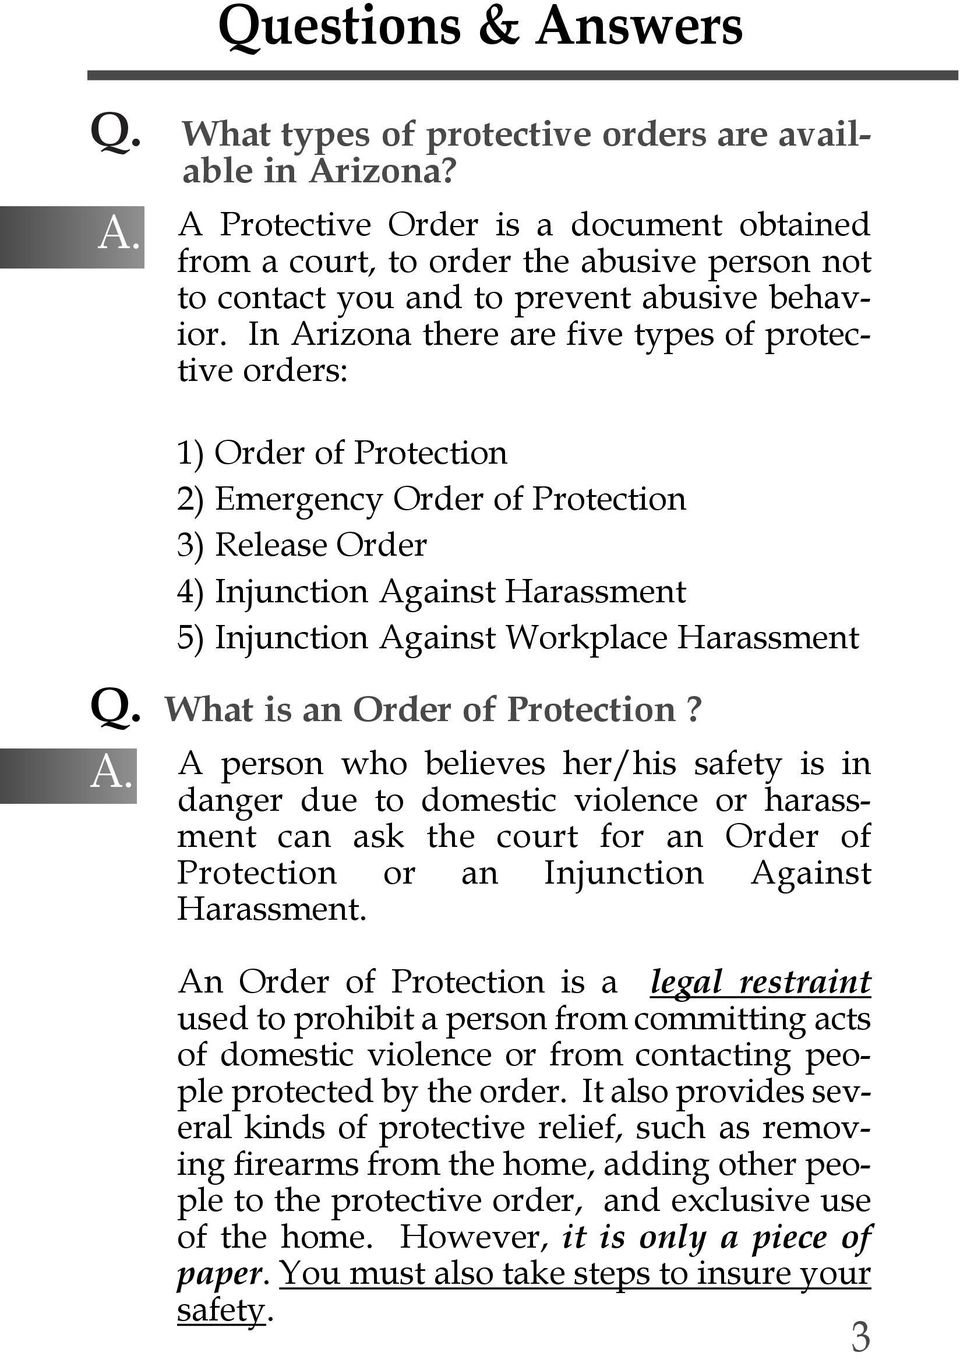 In Arizona there are five types of protective orders: 1) Order of Protection 2) Emergency Order of Protection 3) Release Order 4) Injunction Against Harassment 5) Injunction Against Workplace